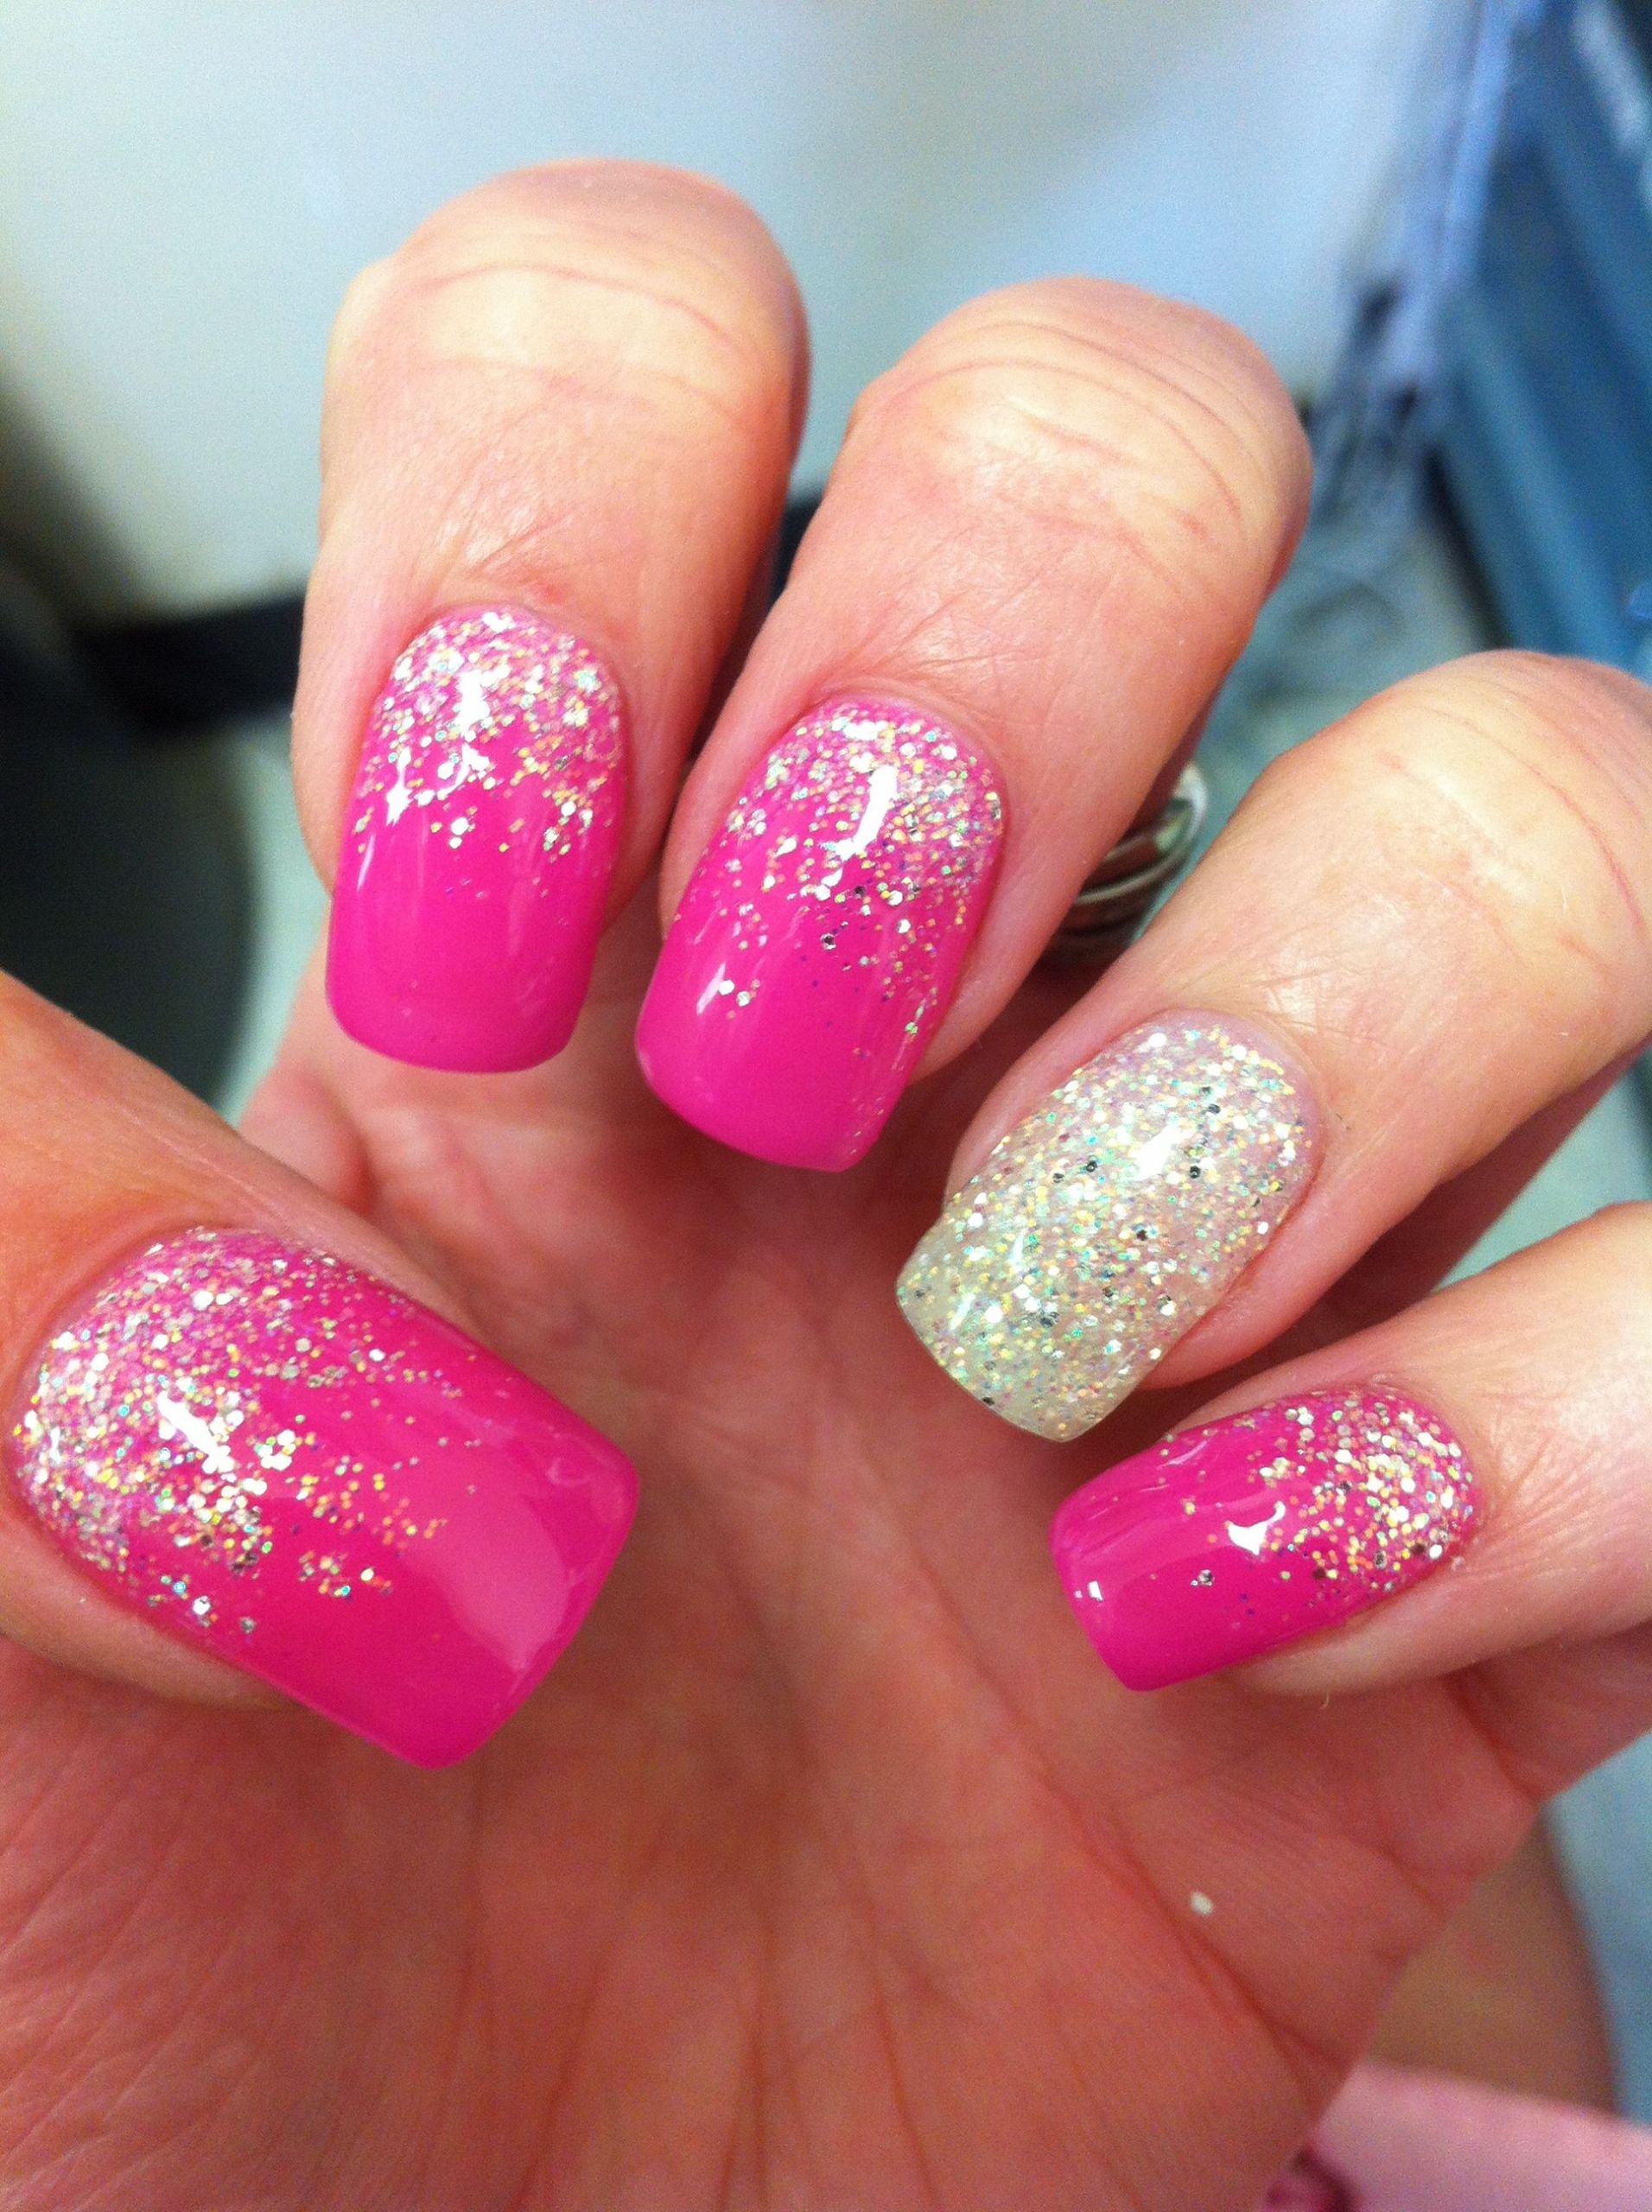 Glitter Fade Gel Nails
 Gel nail art Glitter fade done with INT s drama and